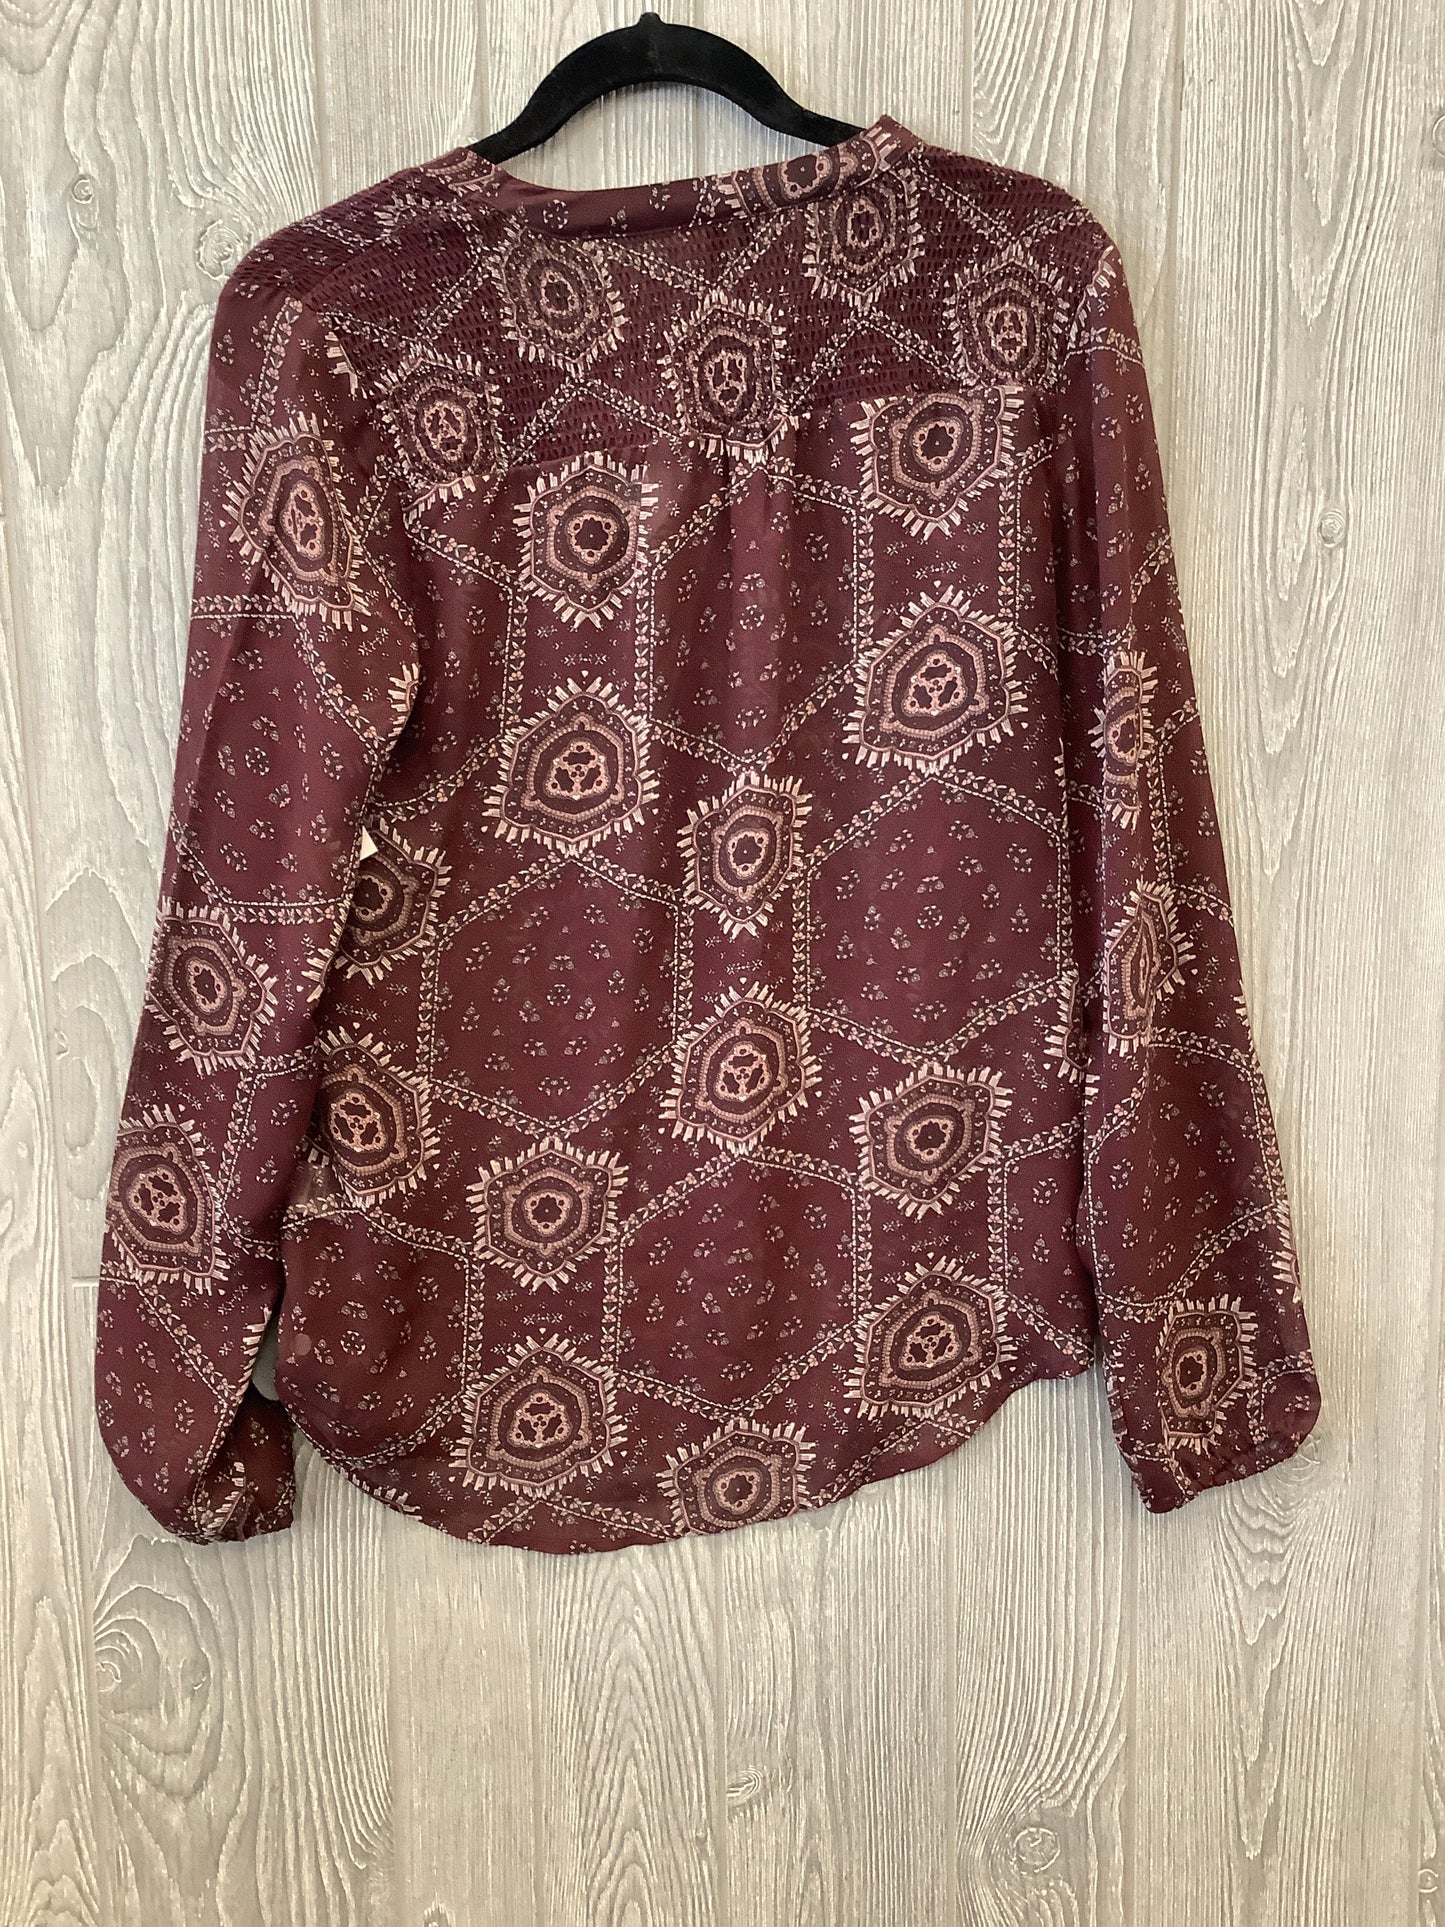 Purple Top Long Sleeve Maurices, Size S